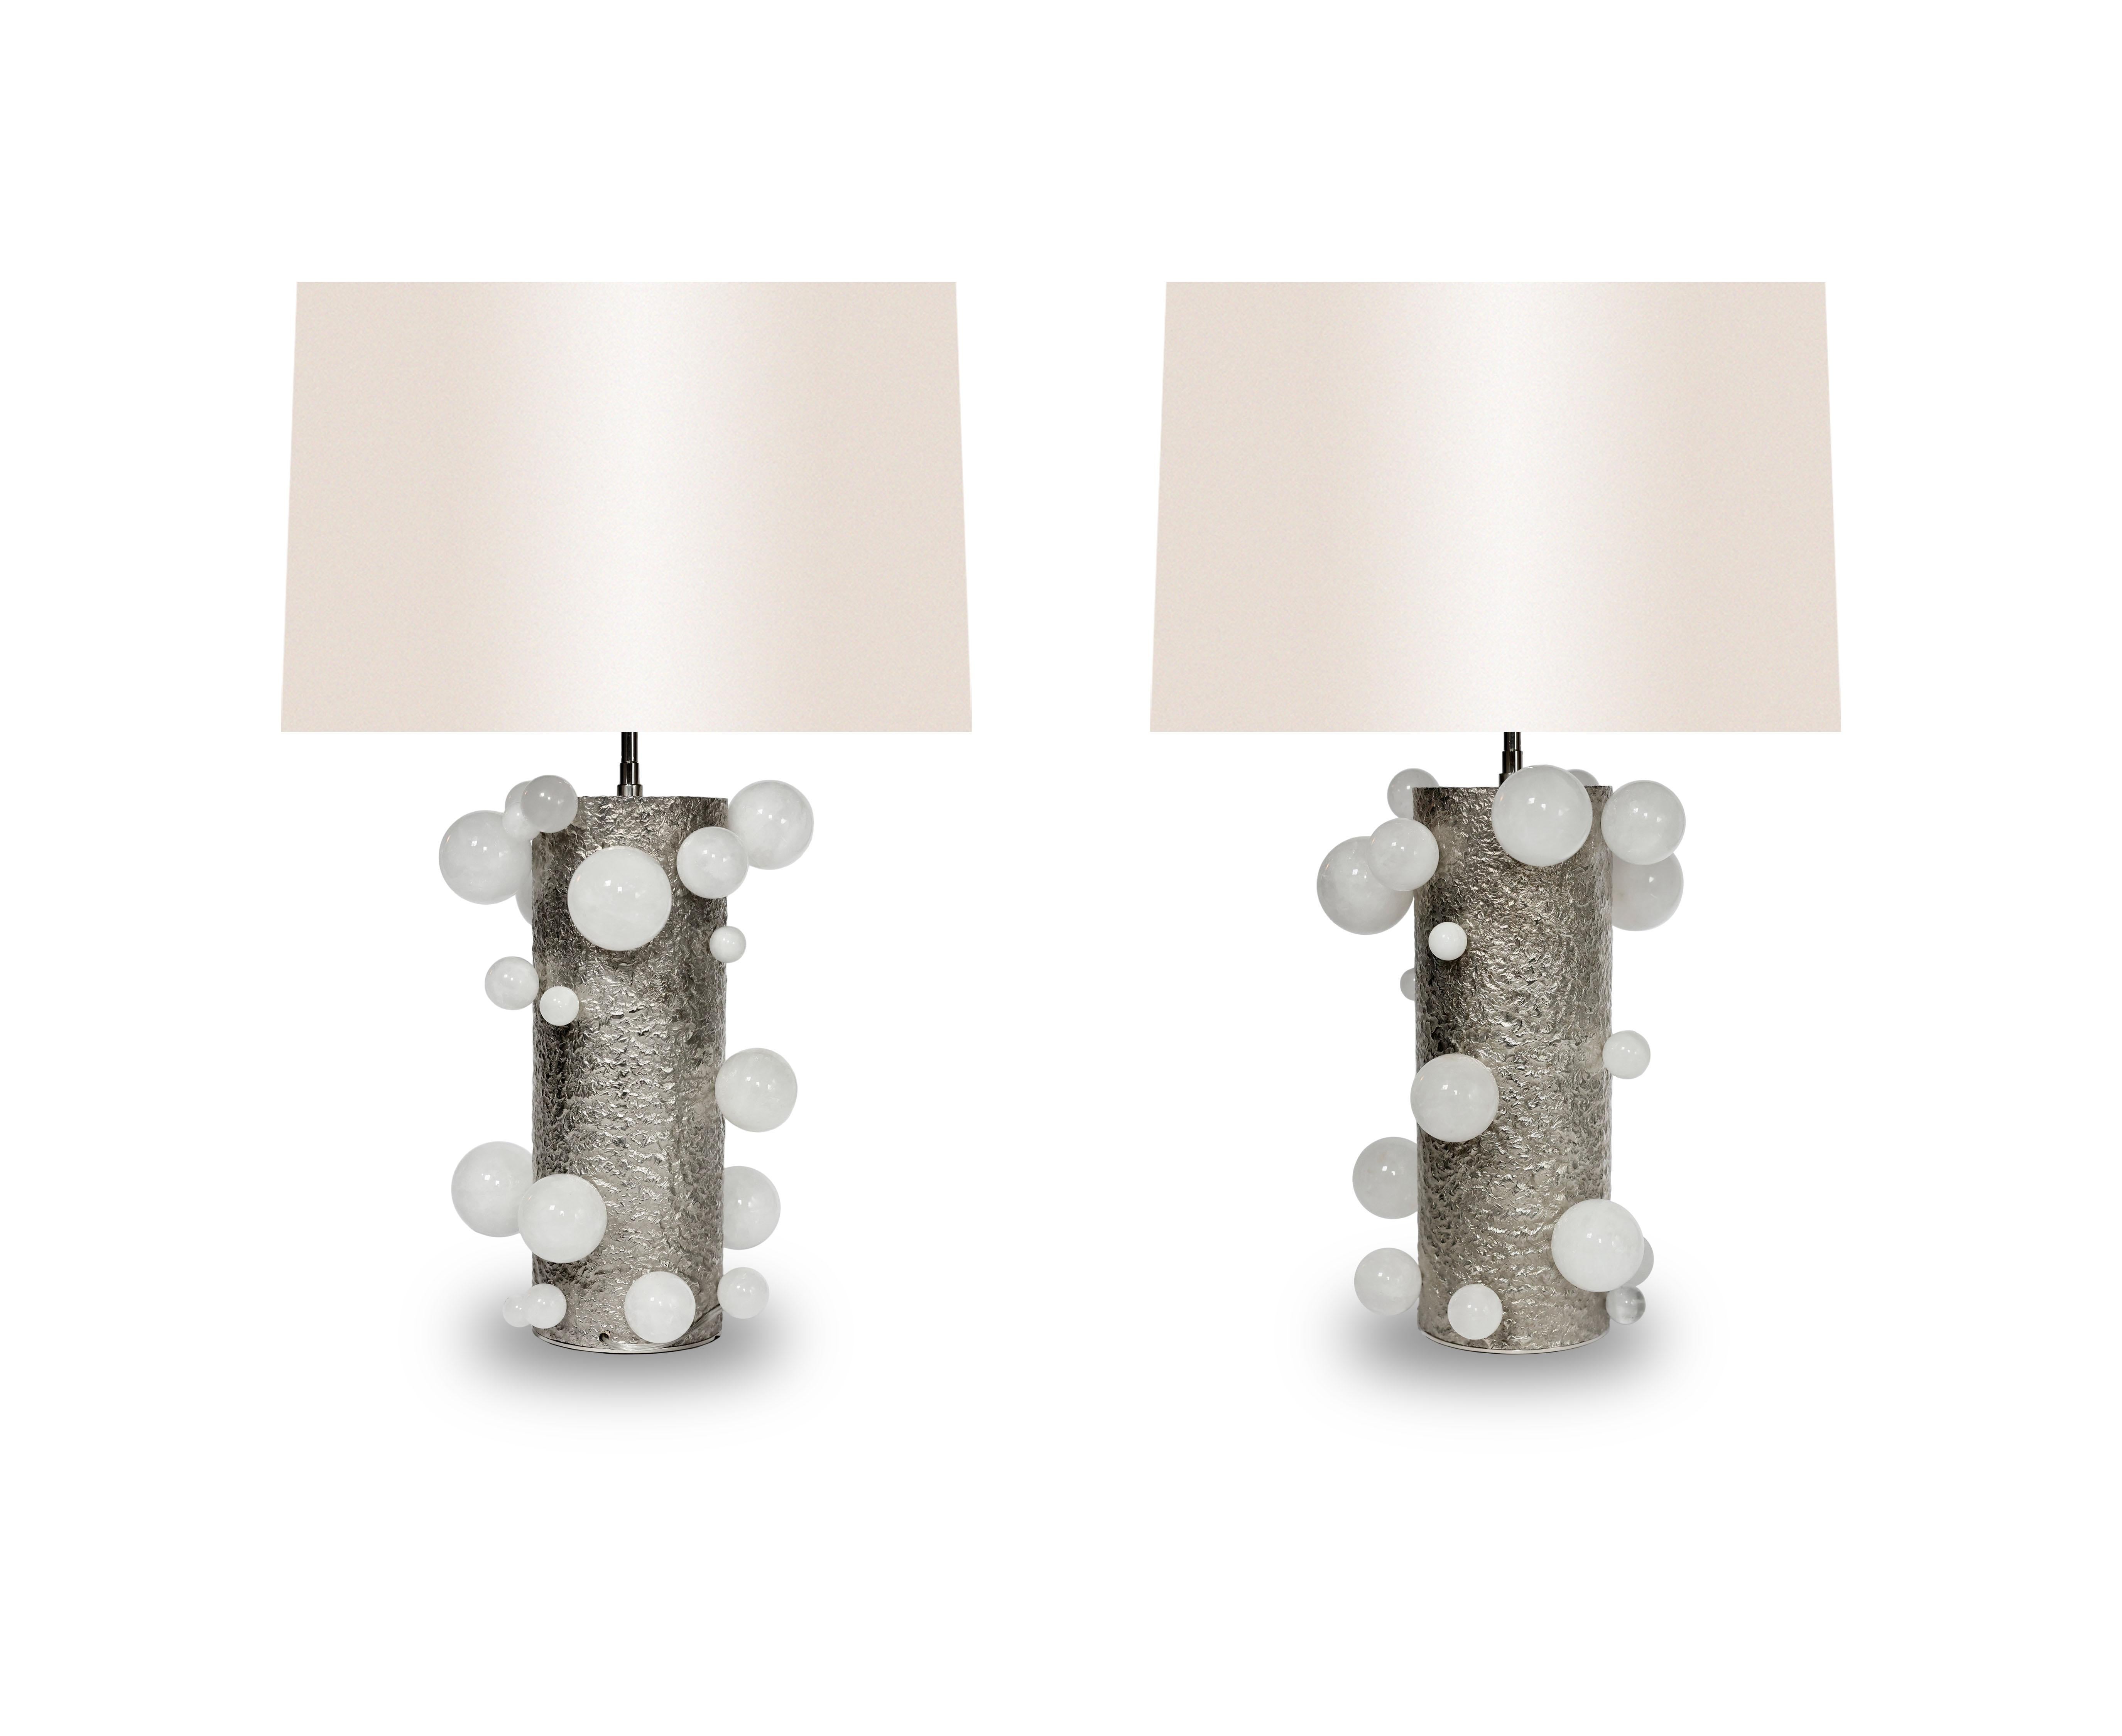 Pair of rock crystal bubble lamps with hammered nickel finish bases

Created by Phoenix.

Lampshades are not included.